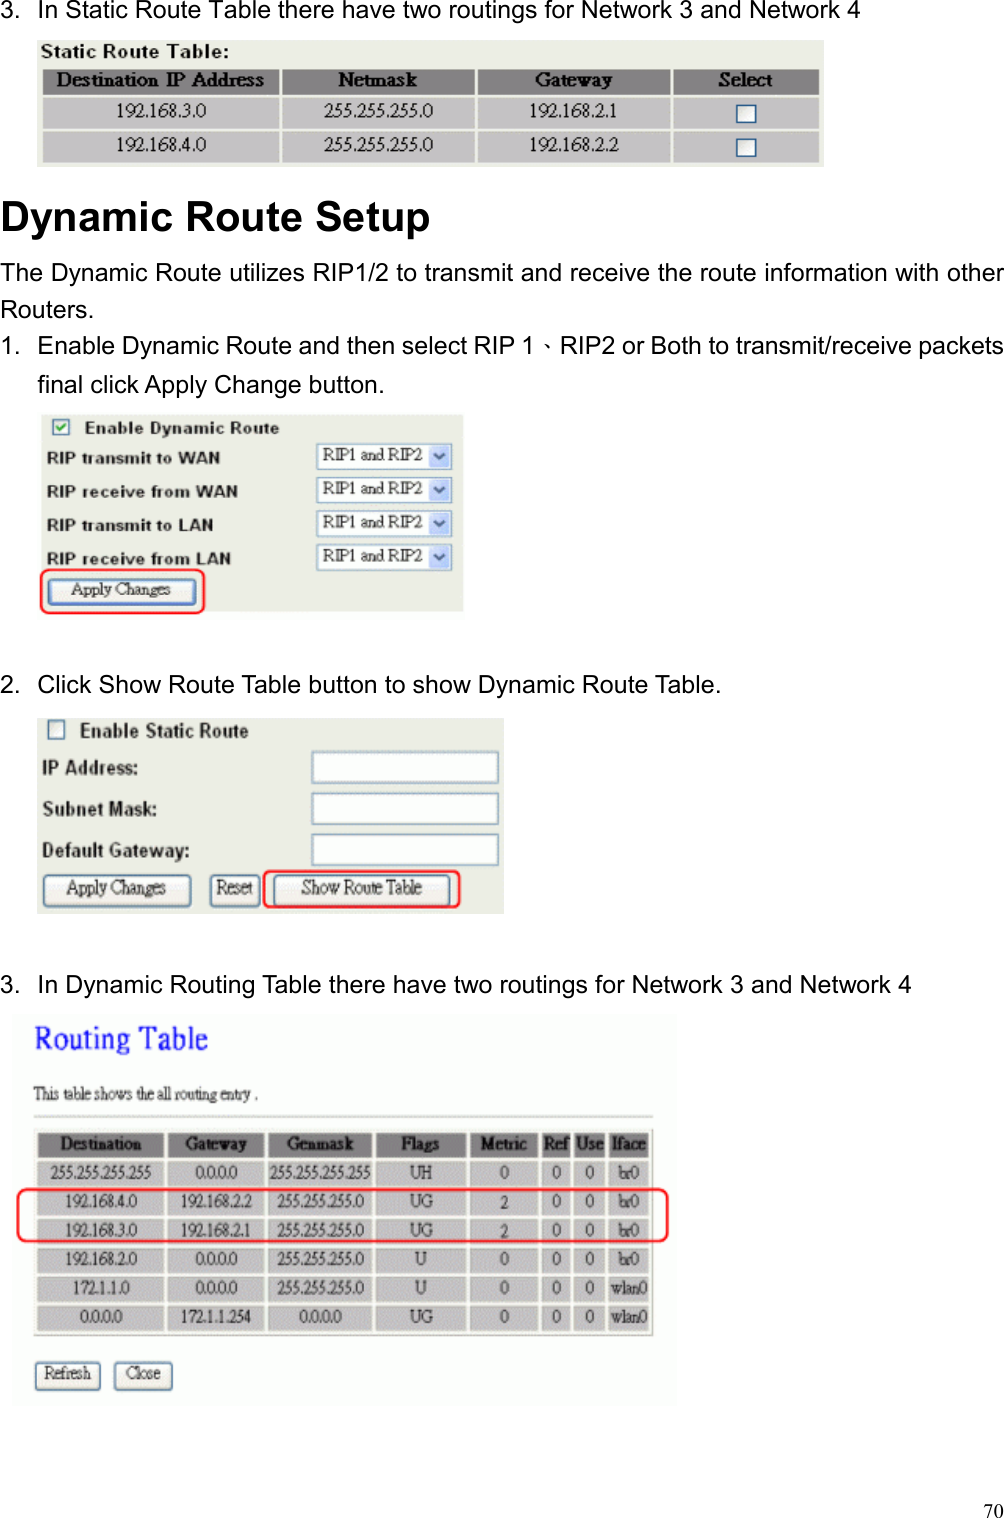  703.  In Static Route Table there have two routings for Network 3 and Network 4  Dynamic Route Setup The Dynamic Route utilizes RIP1/2 to transmit and receive the route information with other Routers. 1.  Enable Dynamic Route and then select RIP 1、RIP2 or Both to transmit/receive packets final click Apply Change button.   2.  Click Show Route Table button to show Dynamic Route Table.   3.  In Dynamic Routing Table there have two routings for Network 3 and Network 4    